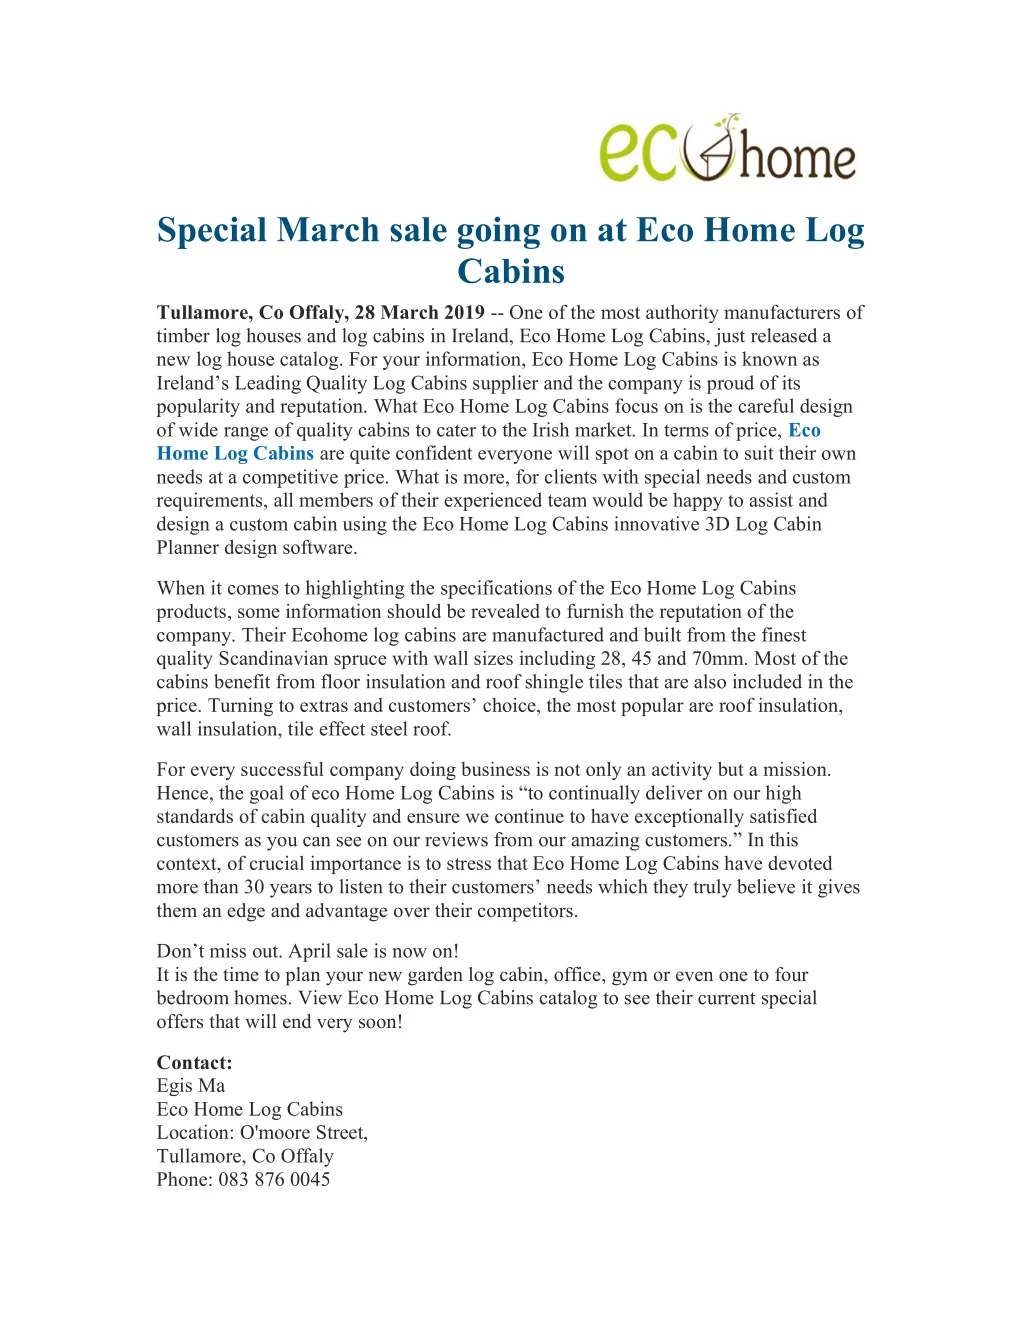 special march sale going on at eco home